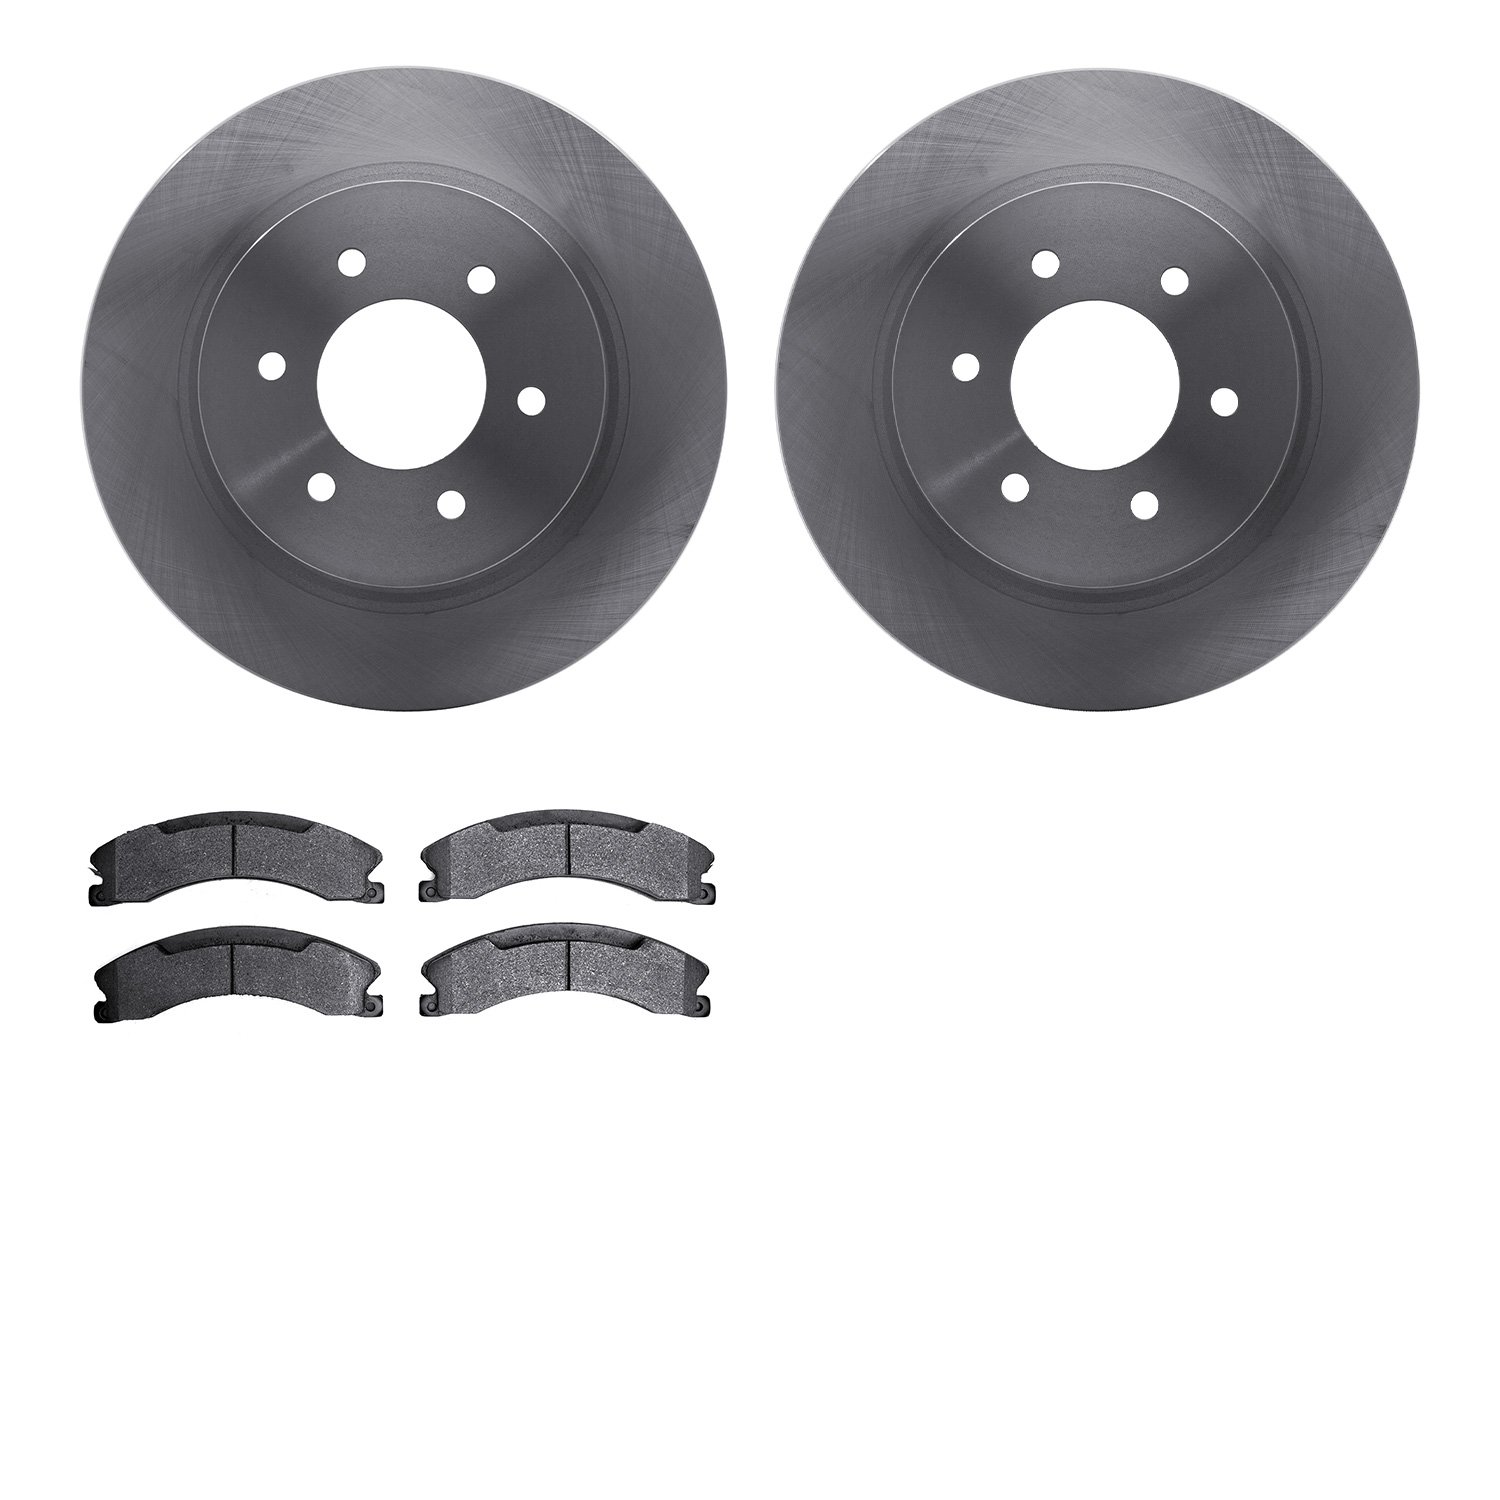 6402-67022 Brake Rotors with Ultimate-Duty Brake Pads, Fits Select Infiniti/Nissan, Position: Front